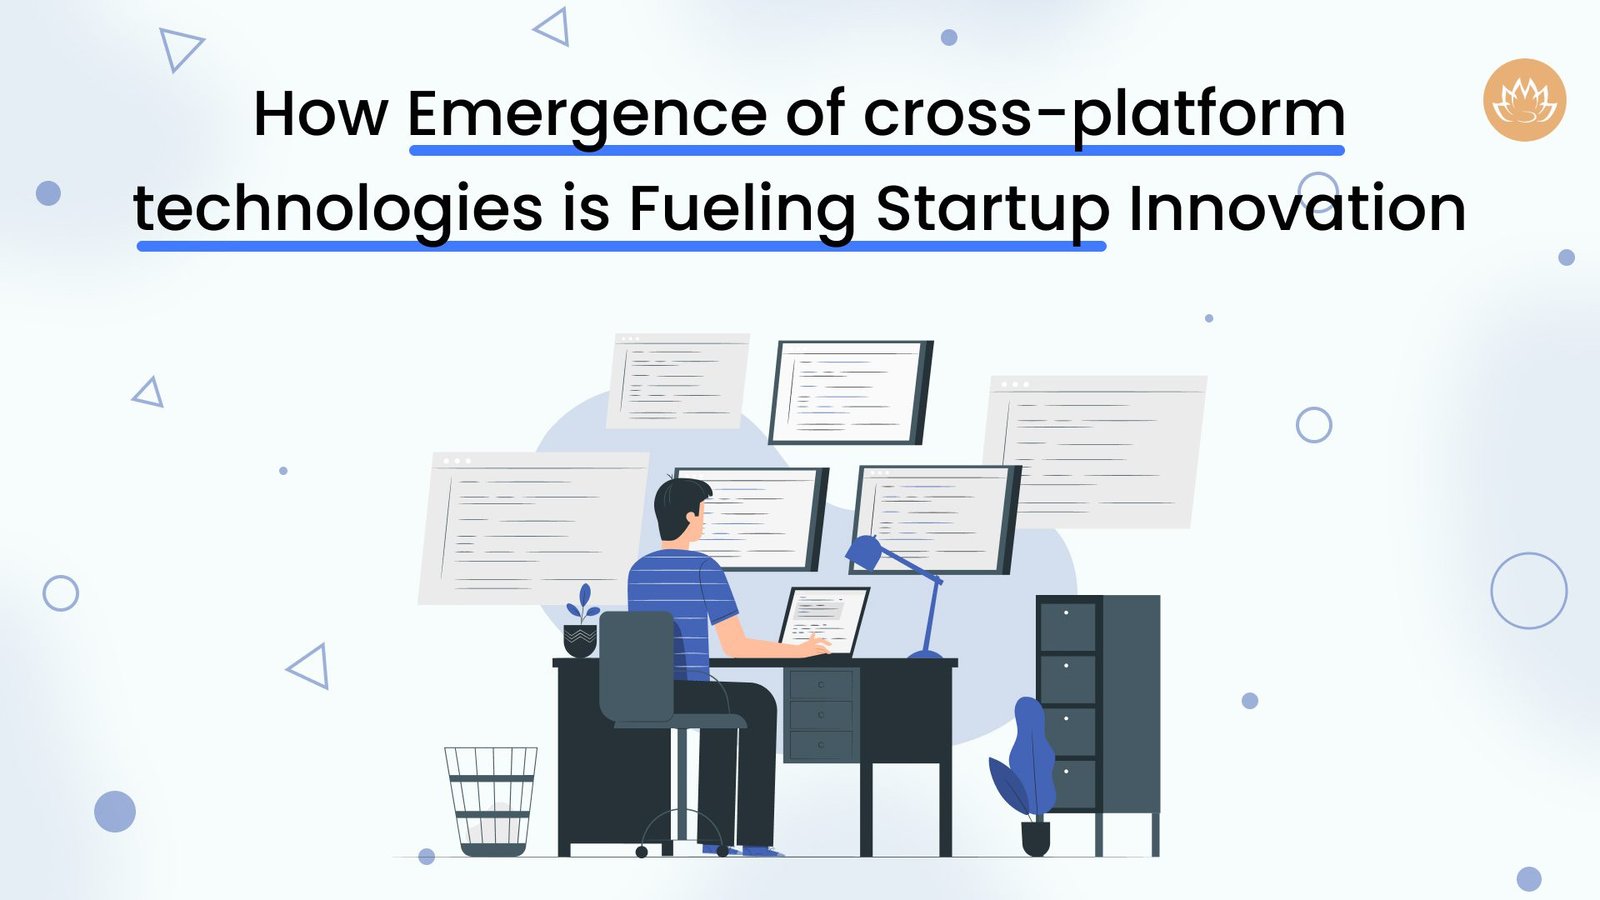 How Emergence of cross-platform technologies is Fueling Startup Innovation